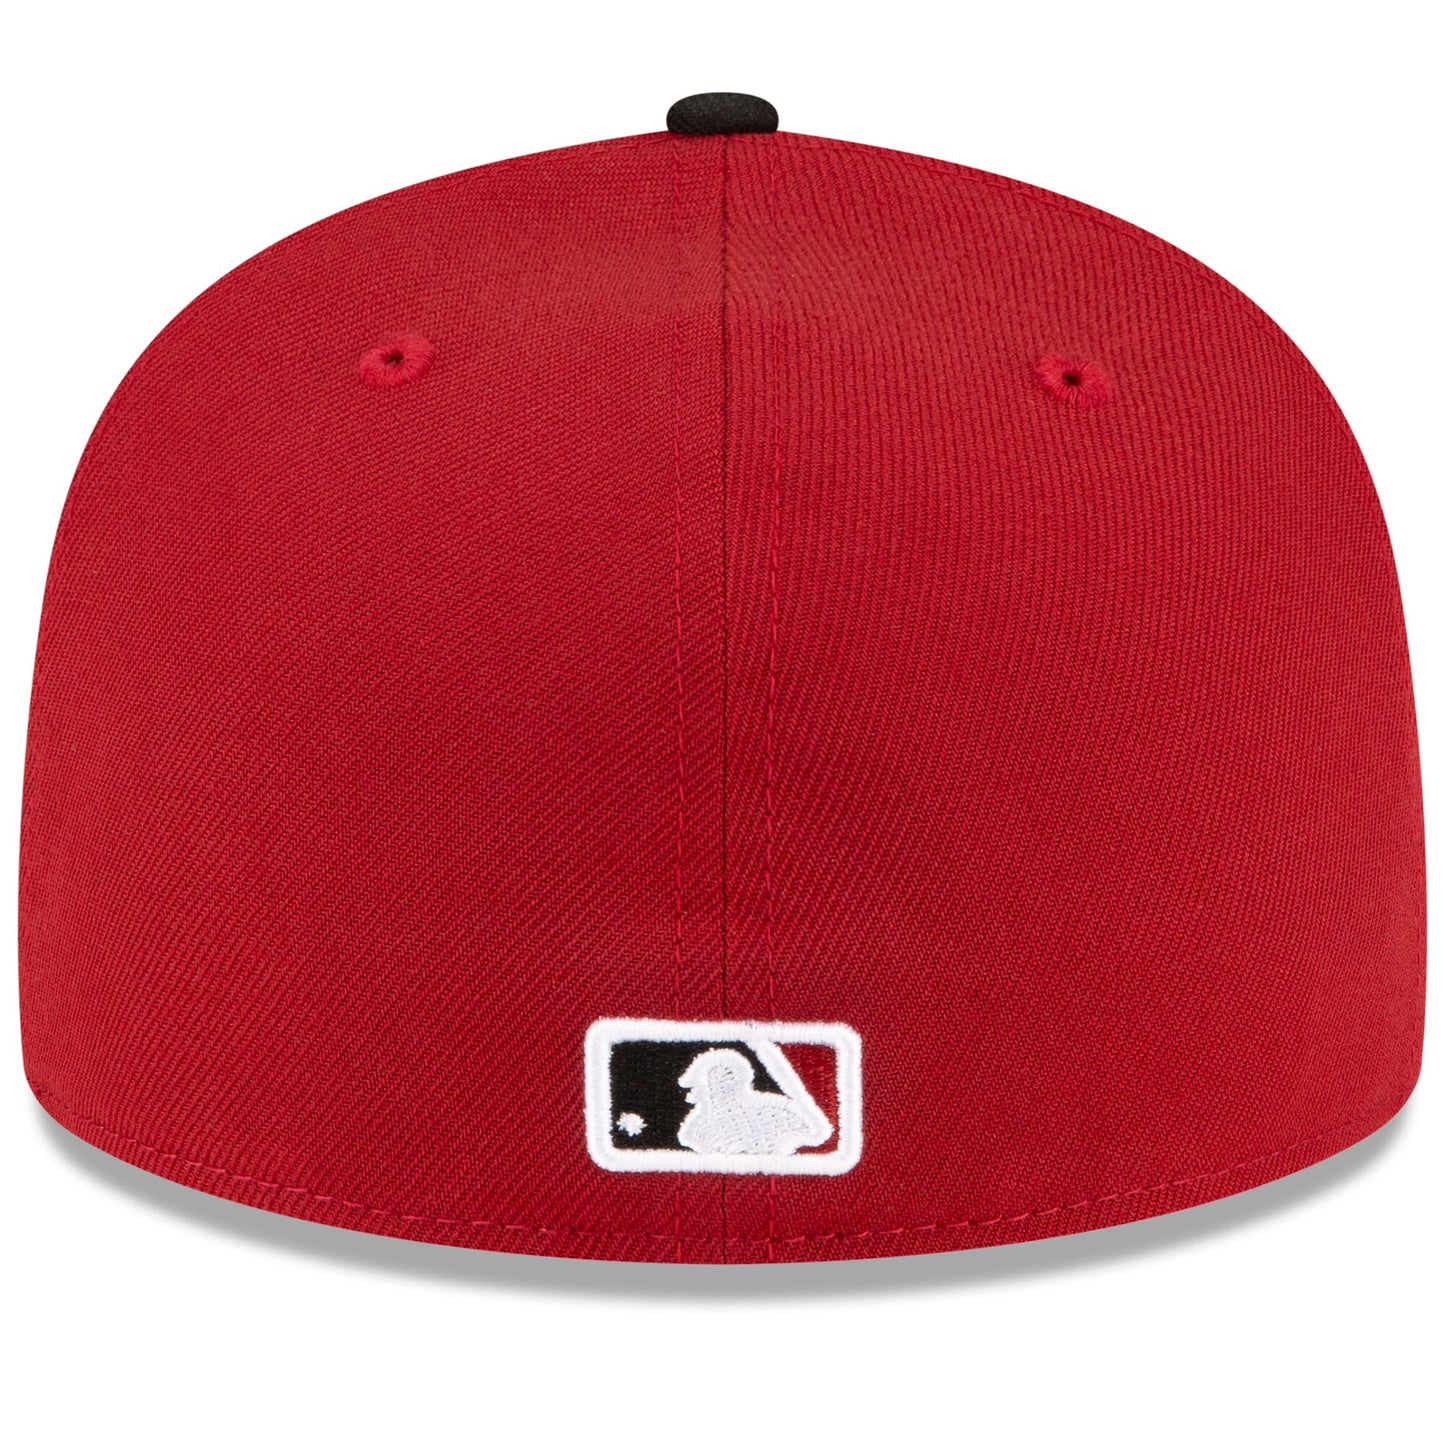 Men's Arizona Diamondbacks New Era Red/Black Home Authentic Collection On-Field 59FIFTY Fitted Hat